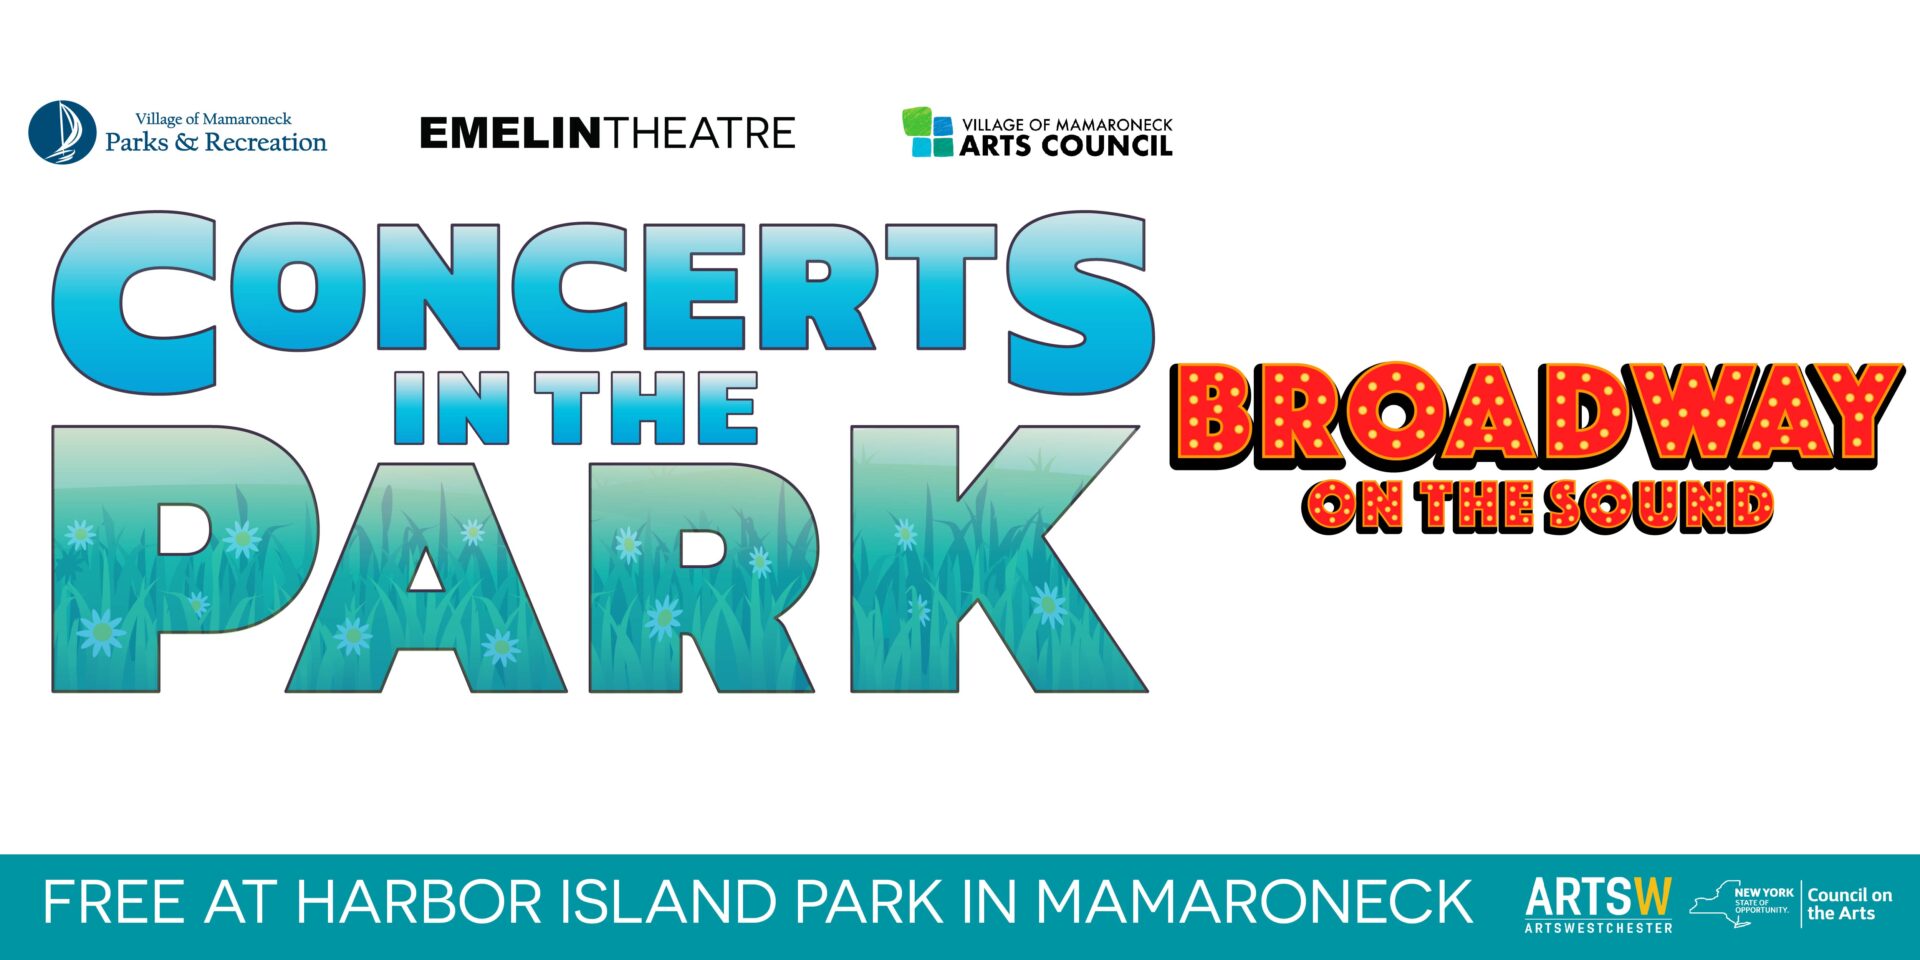 Village of Mamaroneck Parks & Recreation, Emelin Theatre, and Village of Mamaroneck Arts Council Present Concerts in the Park Broadway on the Sound